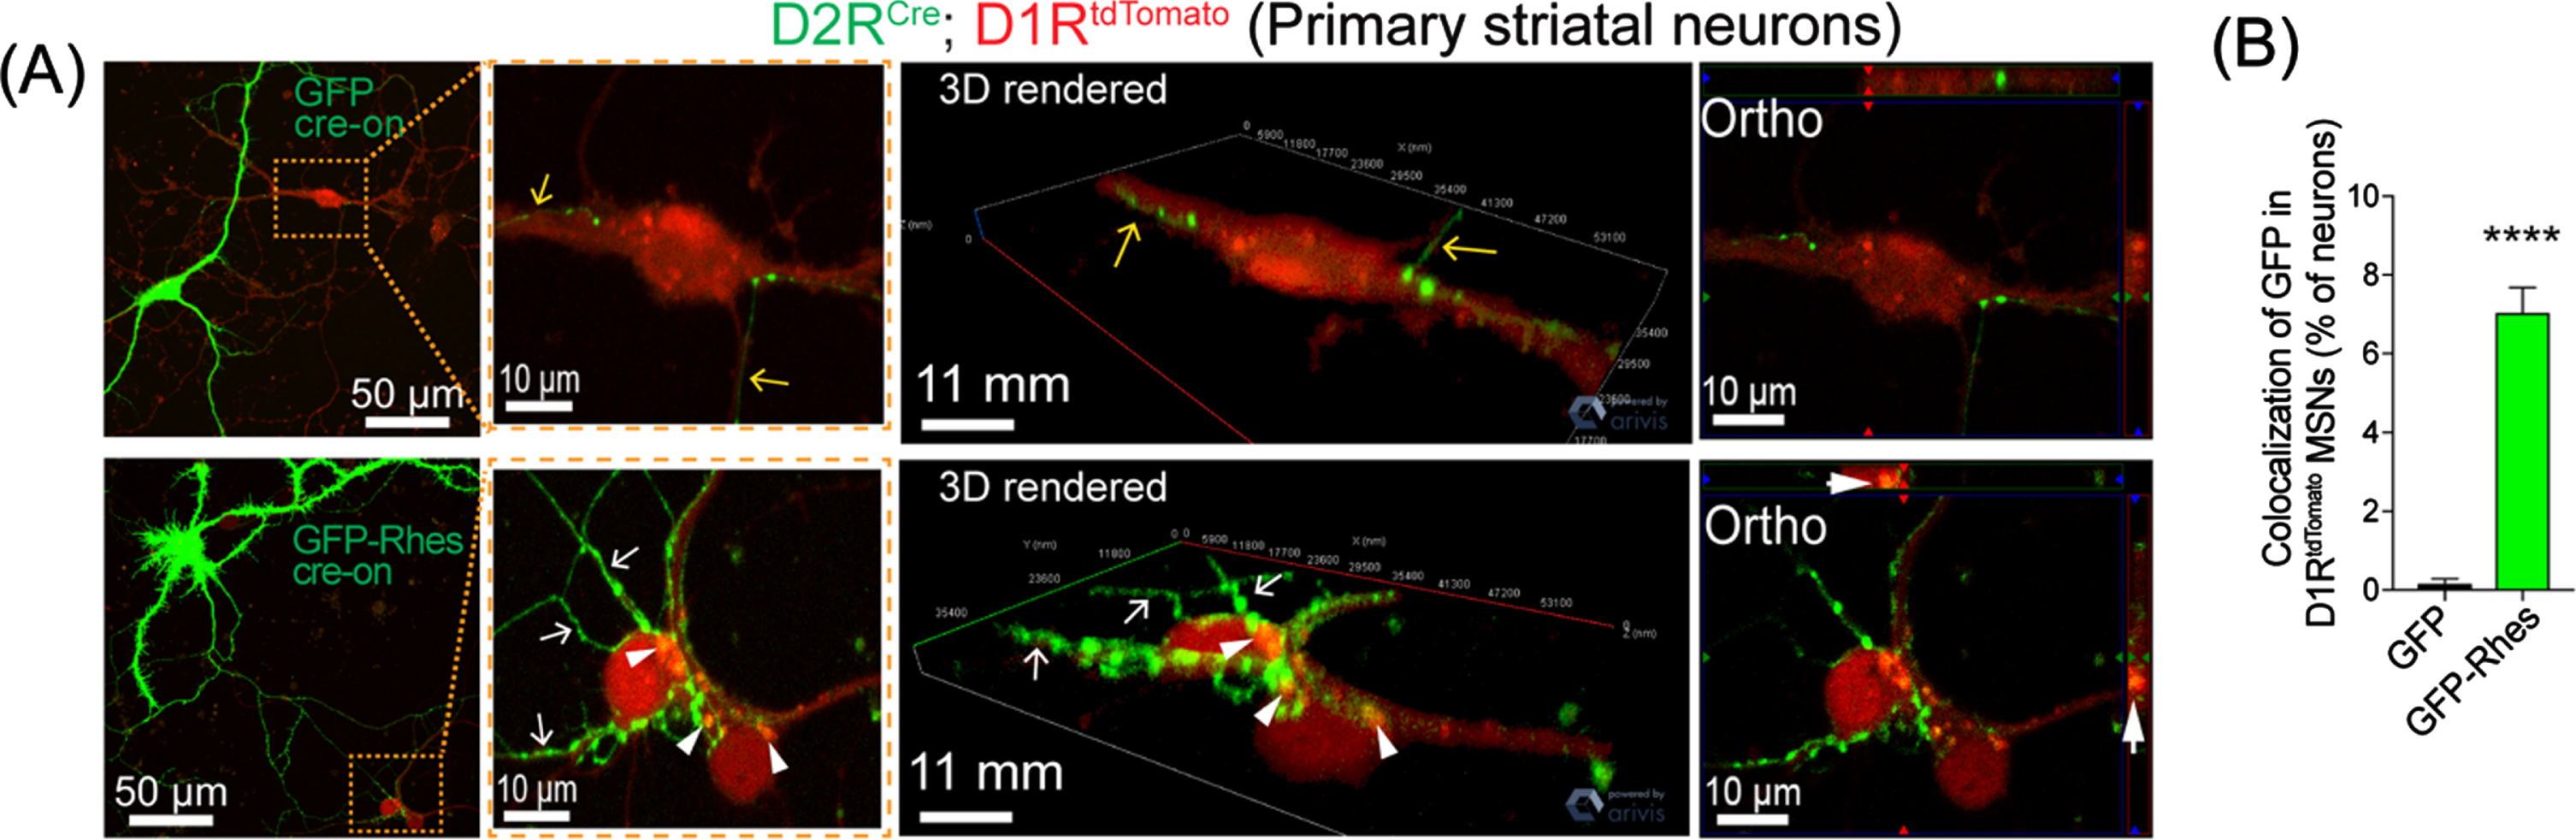 Rhes travels from D2R MSN to D1R MSN in vitro. (A) confocal live-cell images and insets of MSN culture from D2RCre; D1RtdTomato mice infected (DIV5) with AAV-PHP.eB Cre-on GFP or AAV-PHP.eB Cre-on GFP-Rhes (MOI 5). Yellow and white arrow show neuronal processes of GFP or GFP-Rhes from Cre(+) D2R MSN, respectively. The arrowhead shows GFP-Rhes puncta colocalization in Cre(–) D1RtdTomato MSN. 3D rendering and orthogonal (ortho, single plane) images show GFP-Rhes puncta inside the D1RtdTomato MSN. (B) Bar graph shows quantification of colocalization of GFP signal in D1RtdT
omat
o MSNs (% of neurons) for GFP and GFP-Rhes groups (n = 16 D1RtdTomato MSNs/group). Data are mean±SEM; Student’s t-test, ***
p < 0.0001.